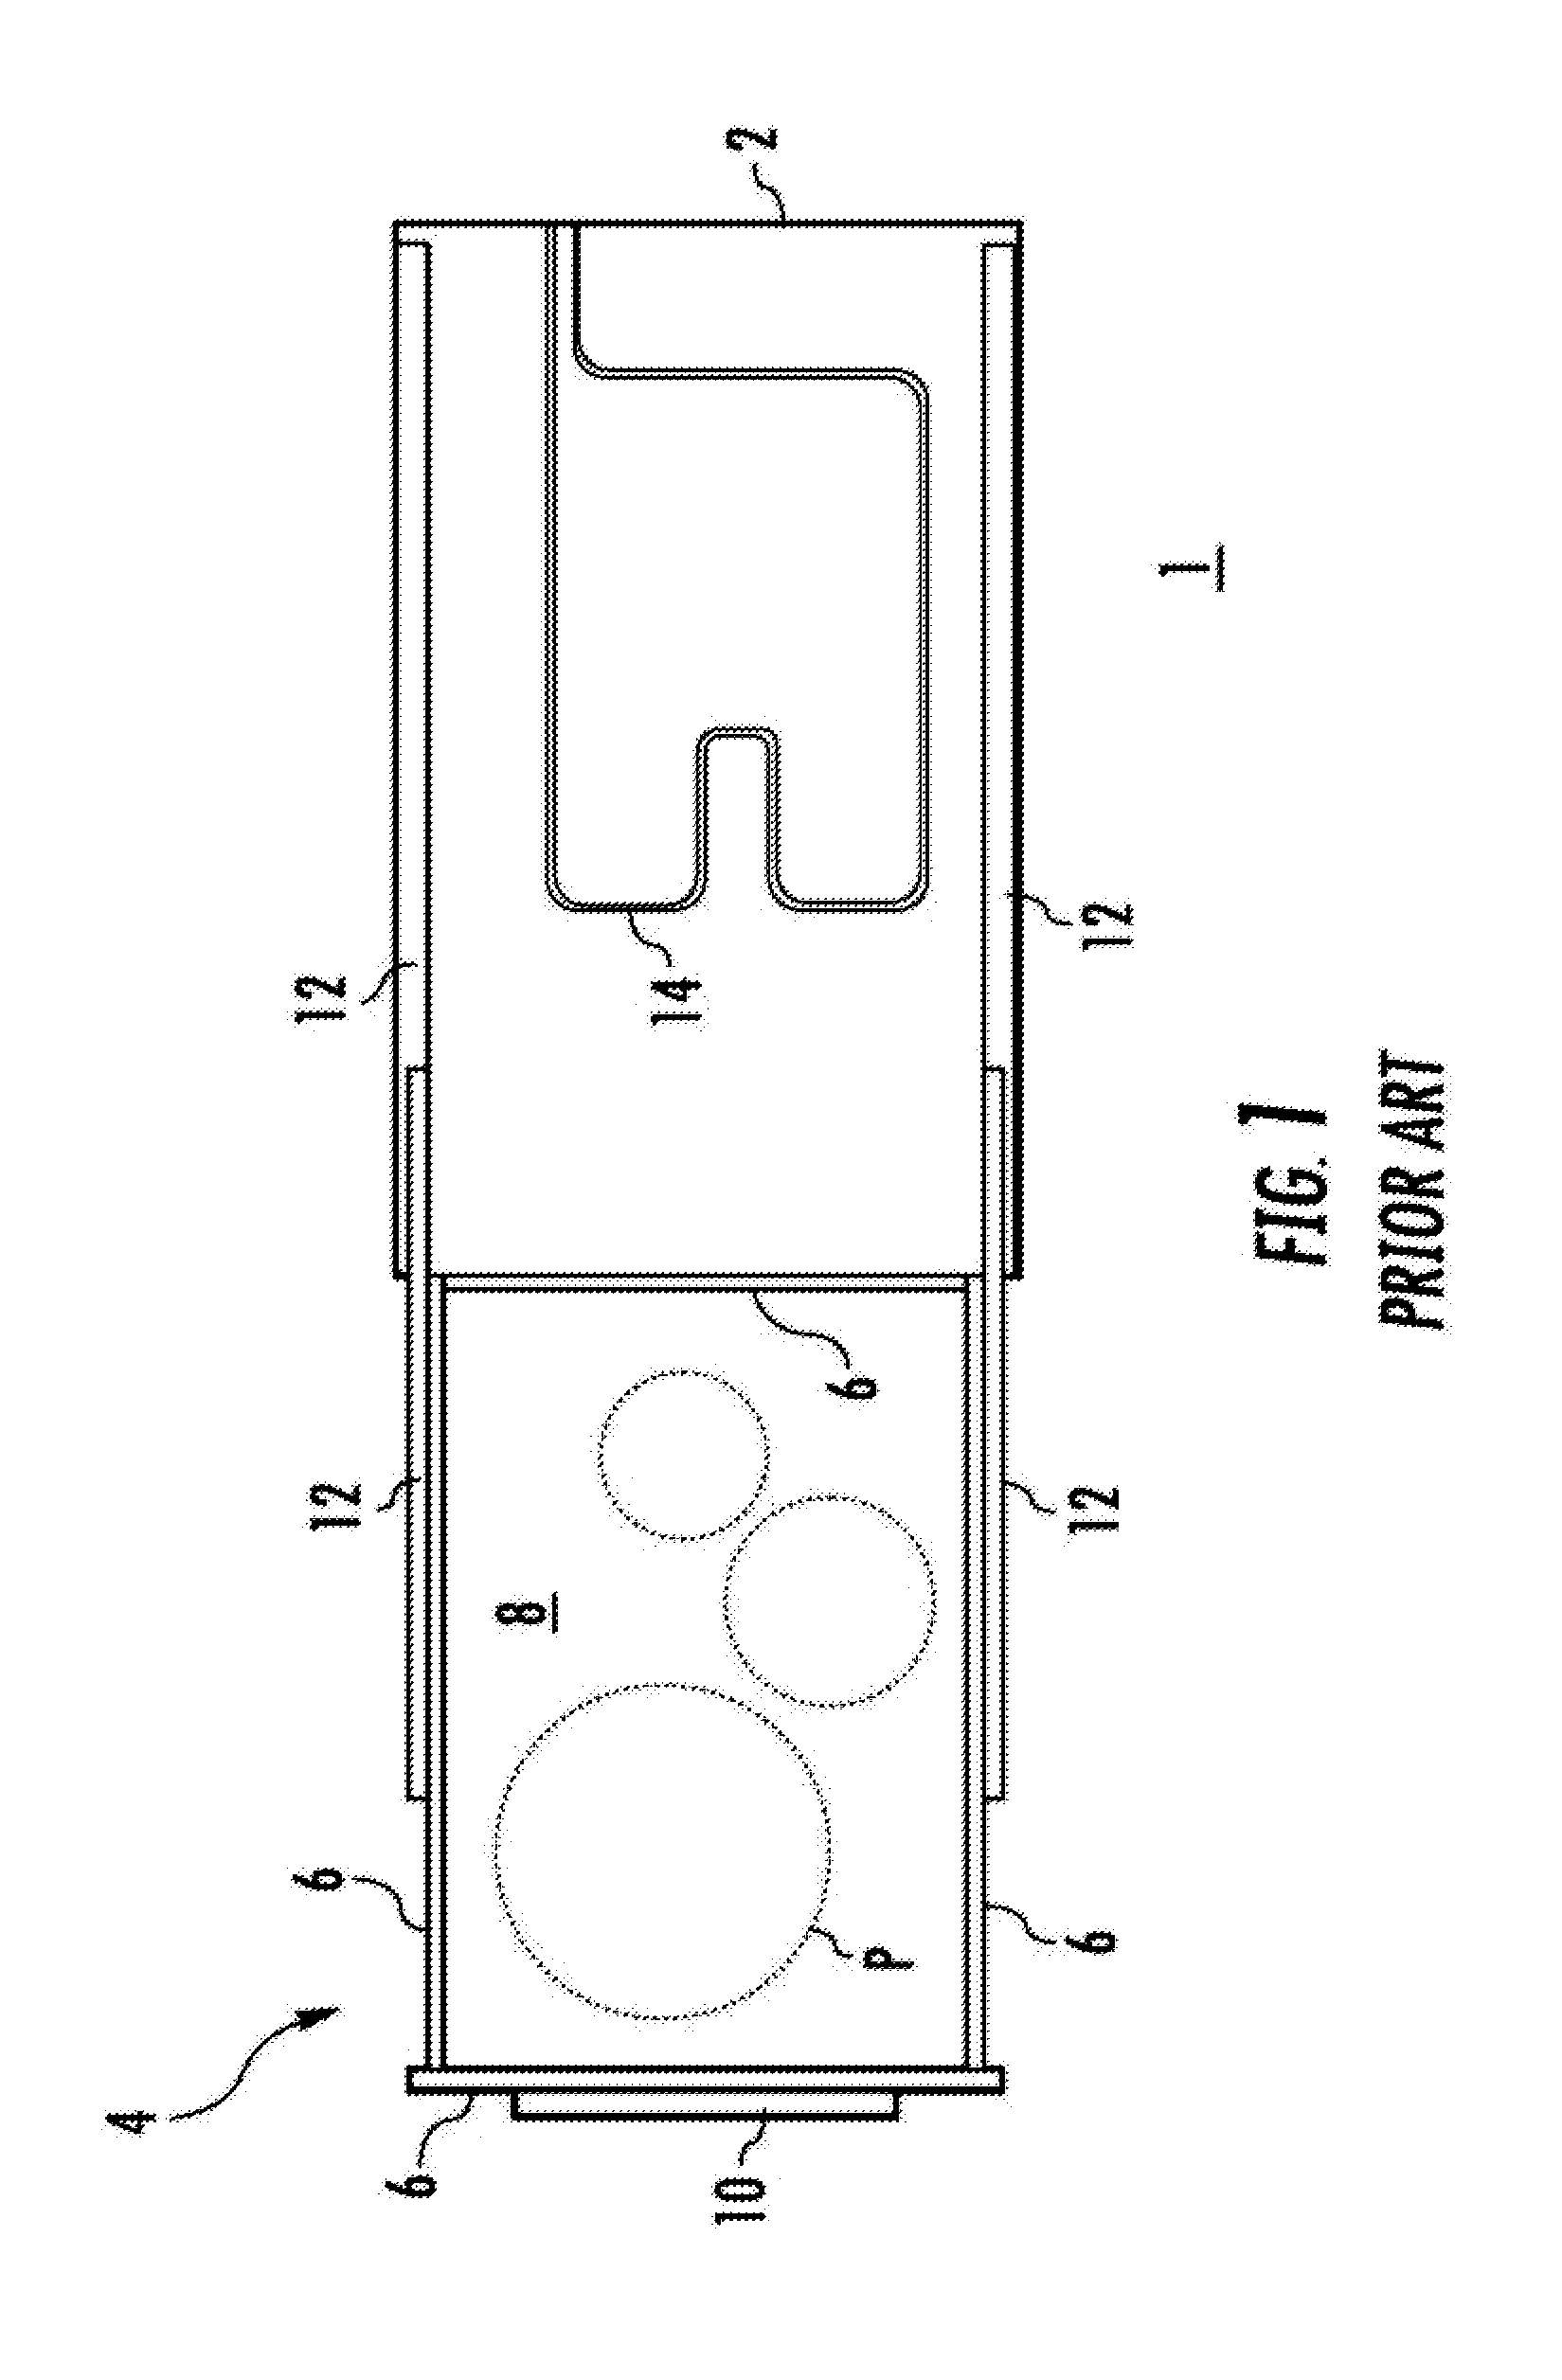 Household appliance having a warming drawer with a thermally conductive layer